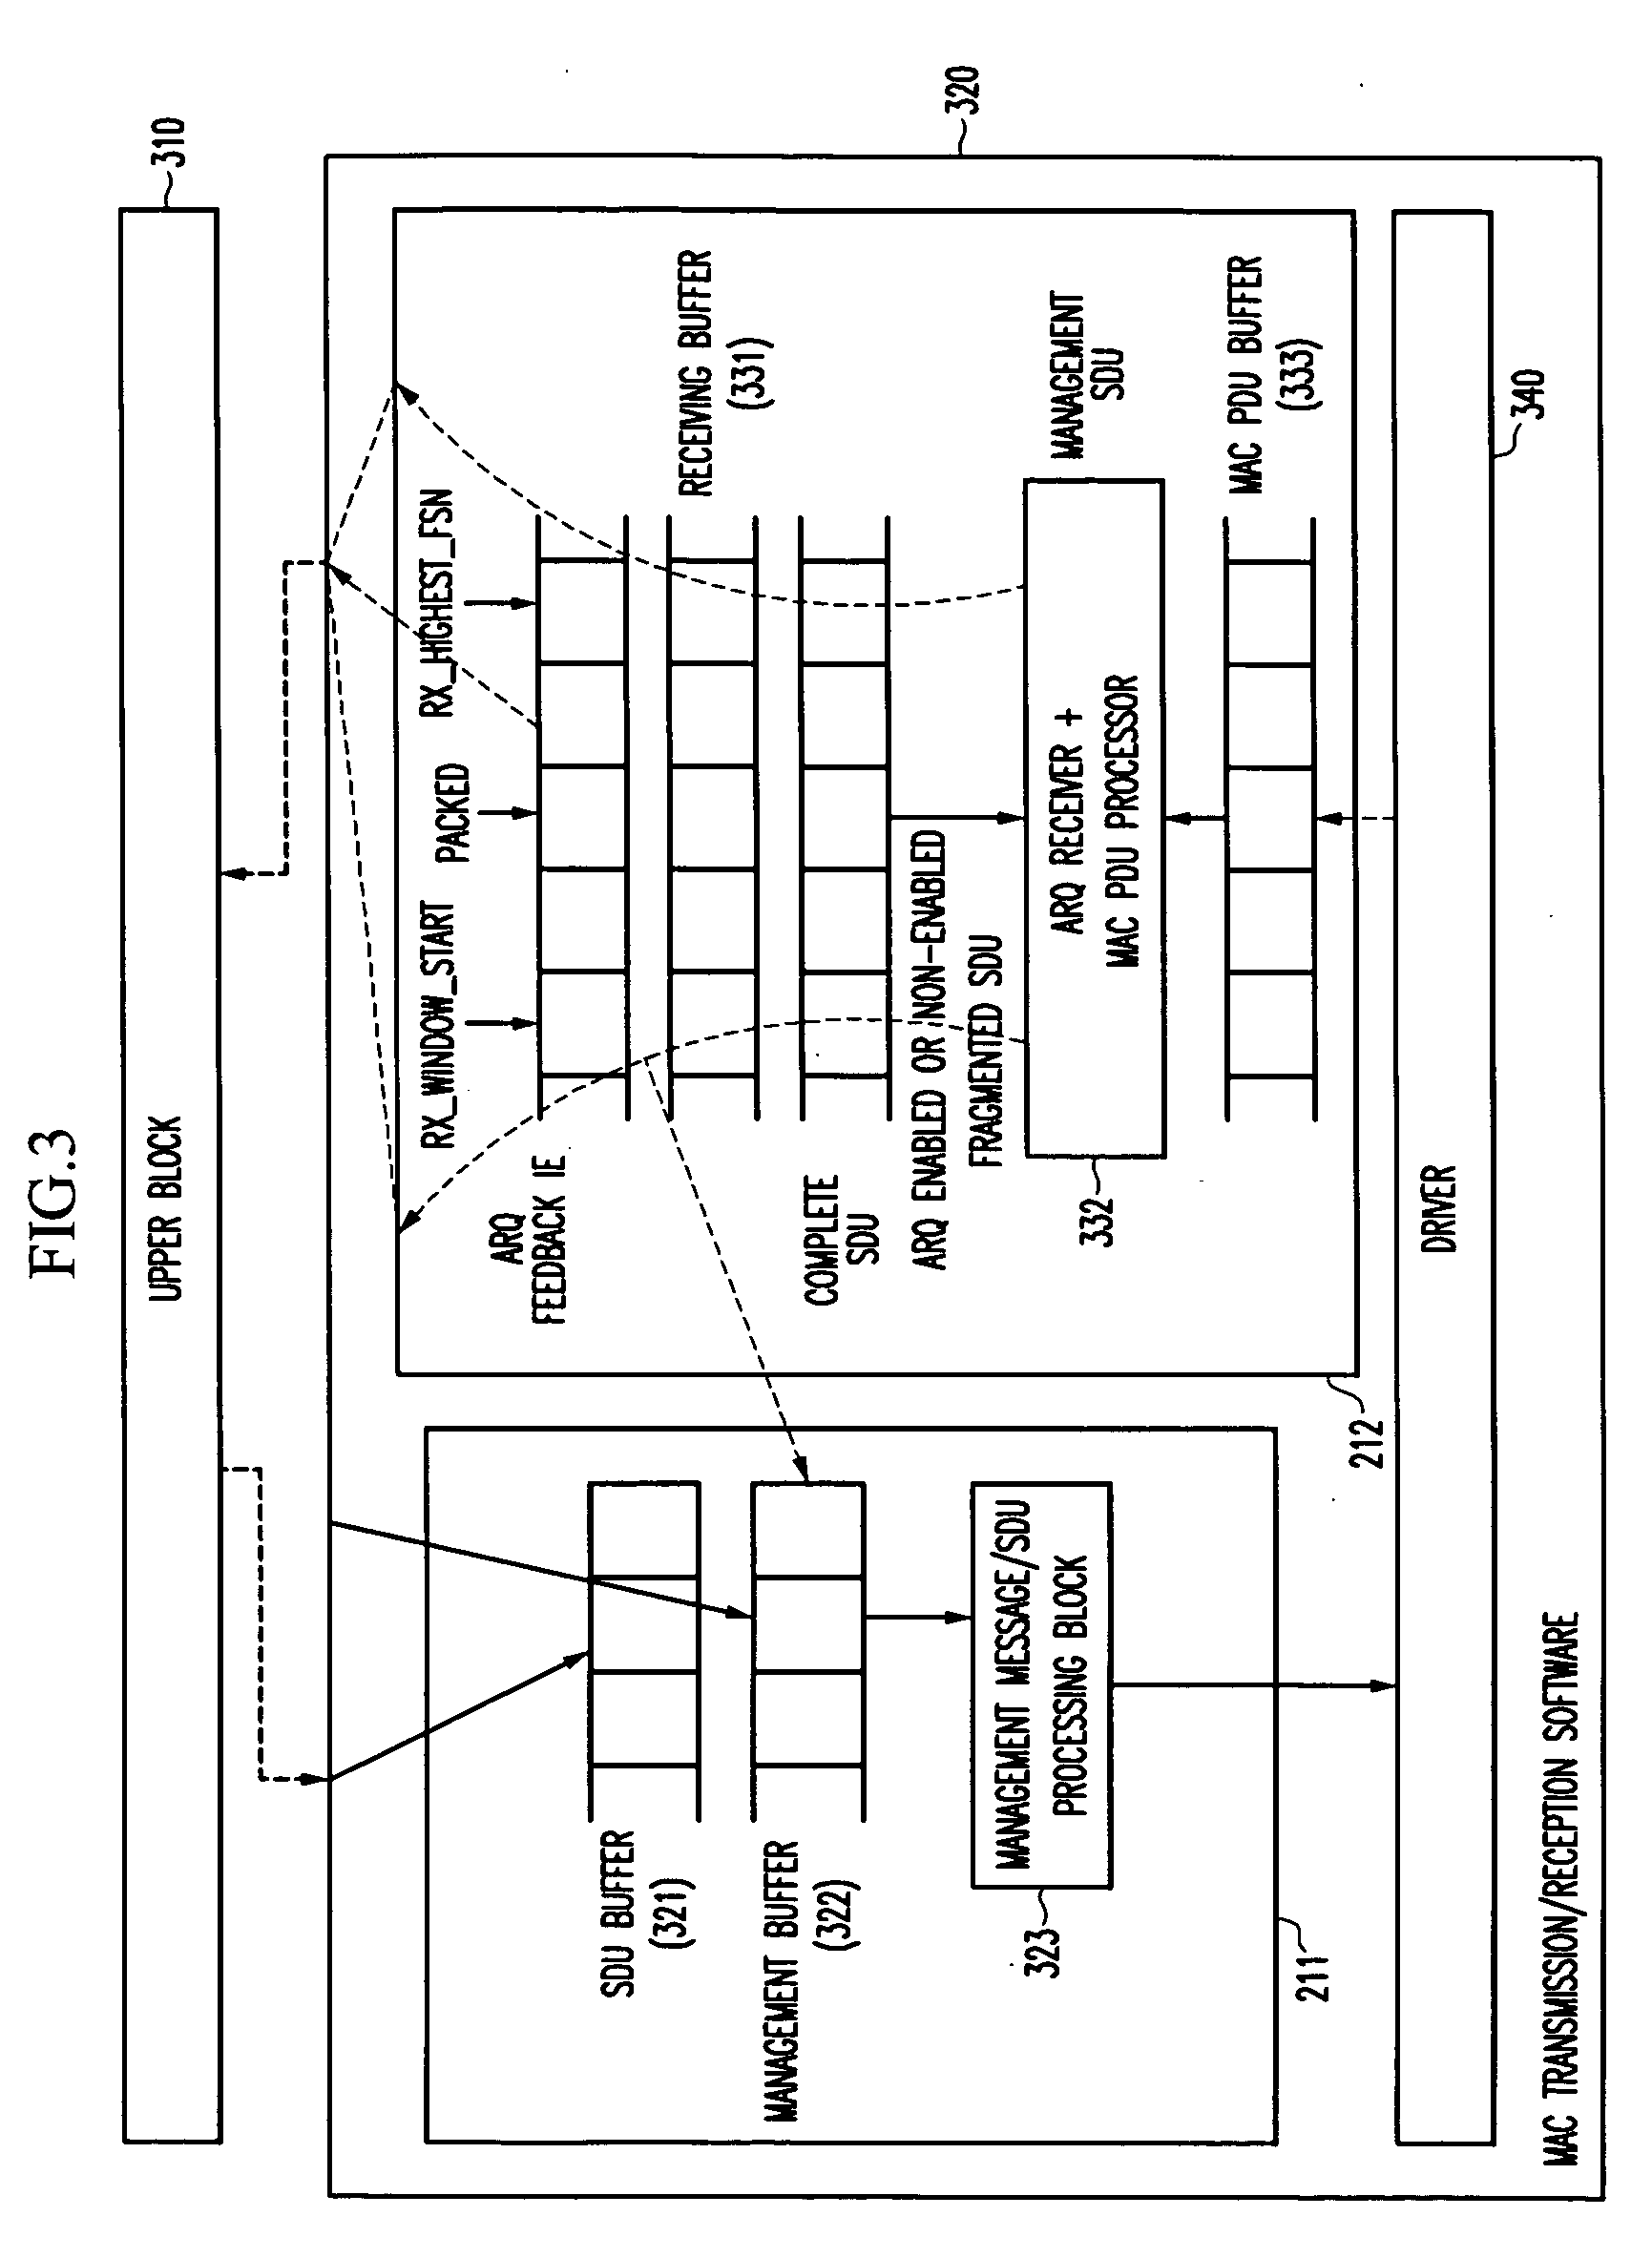 System and method for transmitting/receiving automatic repeat request